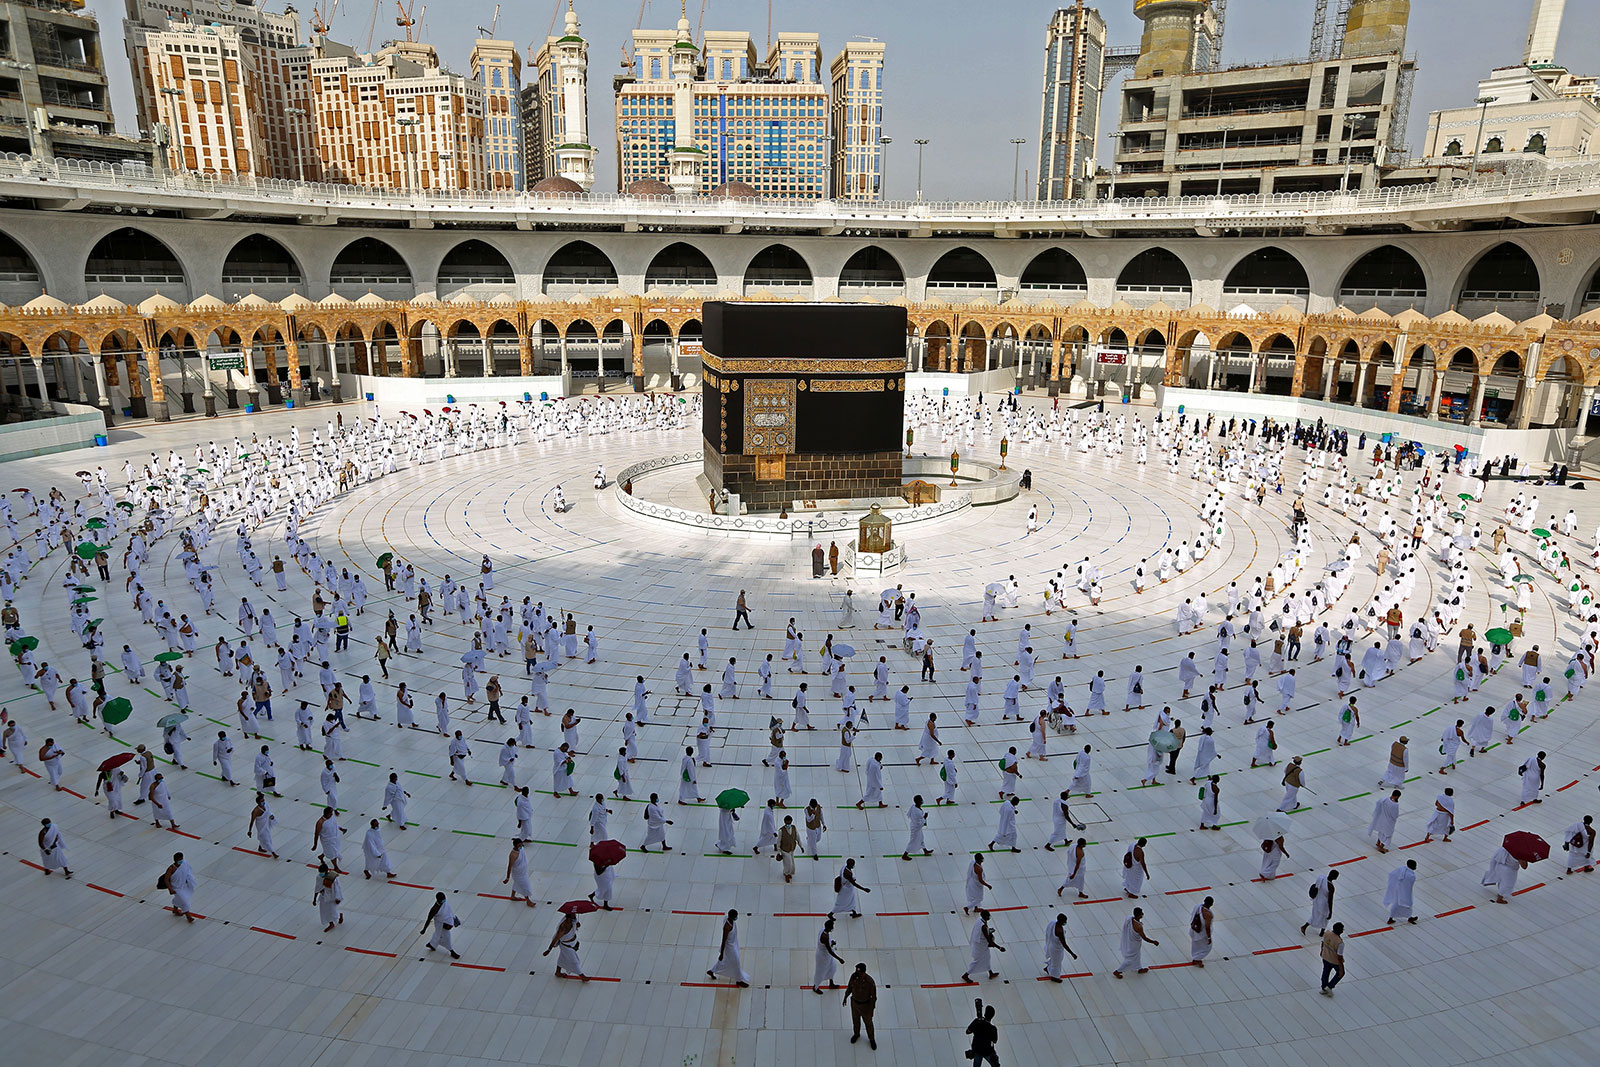 Muslim pilgrims maintain social distancing as they circle the Kaaba in the Islamic holy city of Mecca in Saudi Arabia on Friday, July 31.